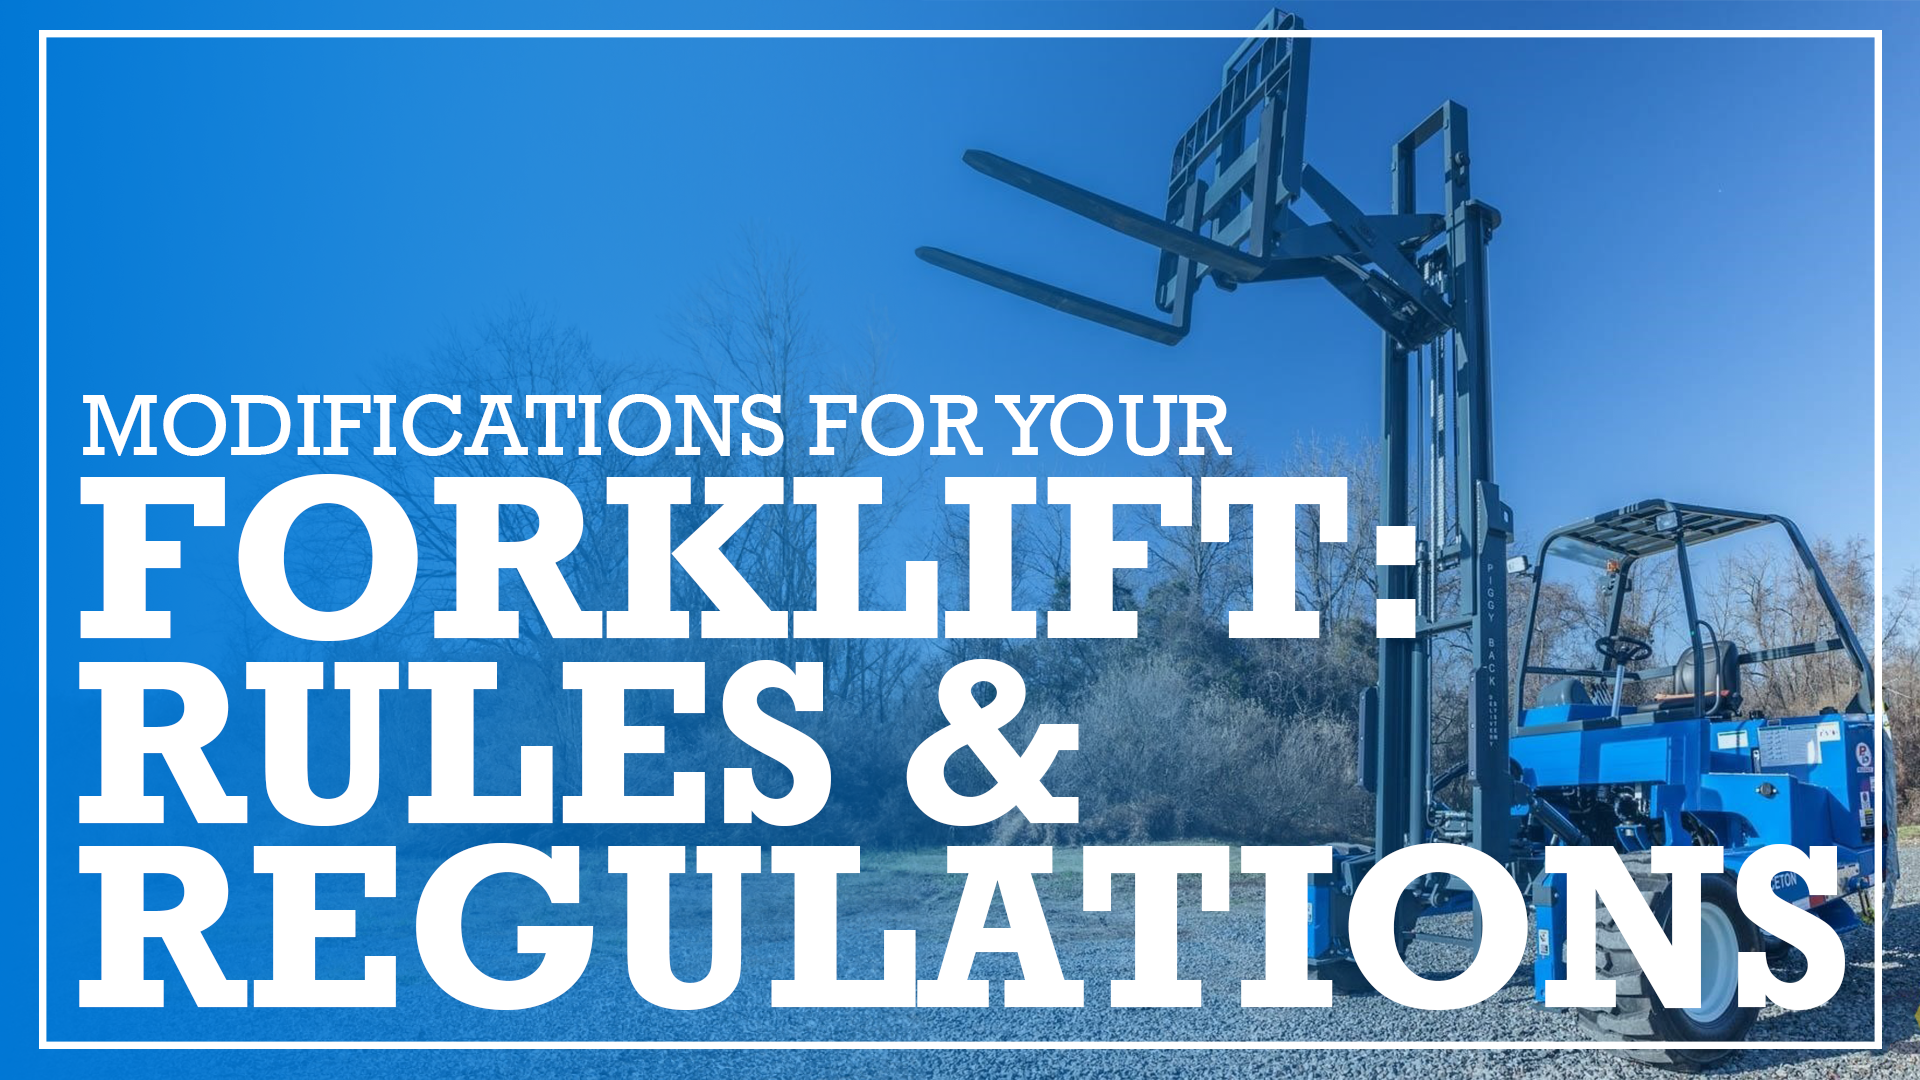 Modifications for Your Forklift: Rules and Regulations 